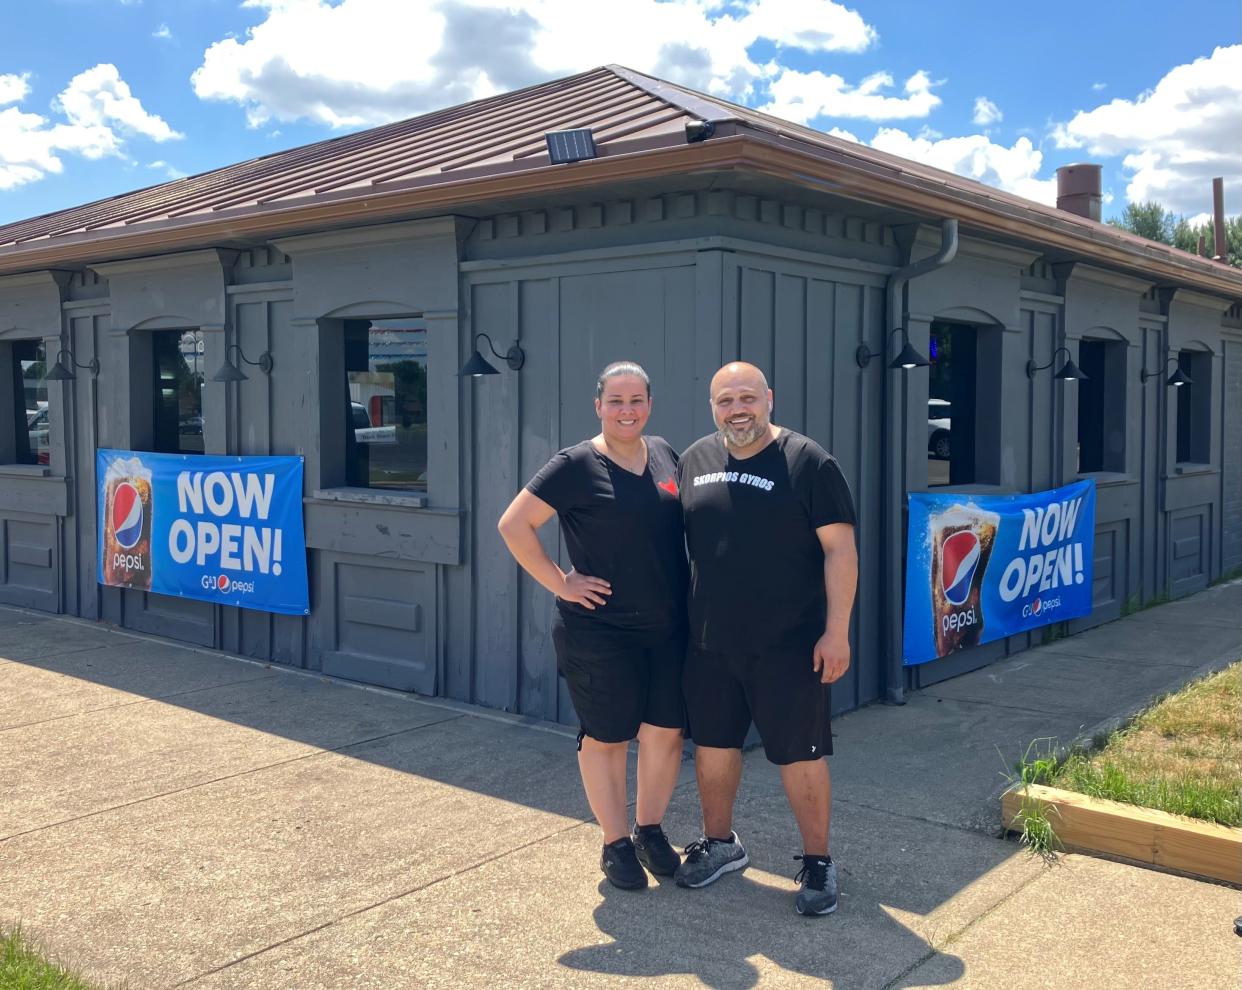 Alaa Babieh and Farah Hussein, owners of Skorpios Gyros, have opened Al's Chicken Lab in the former Pizza Hut building on North 21st Street in Newark.